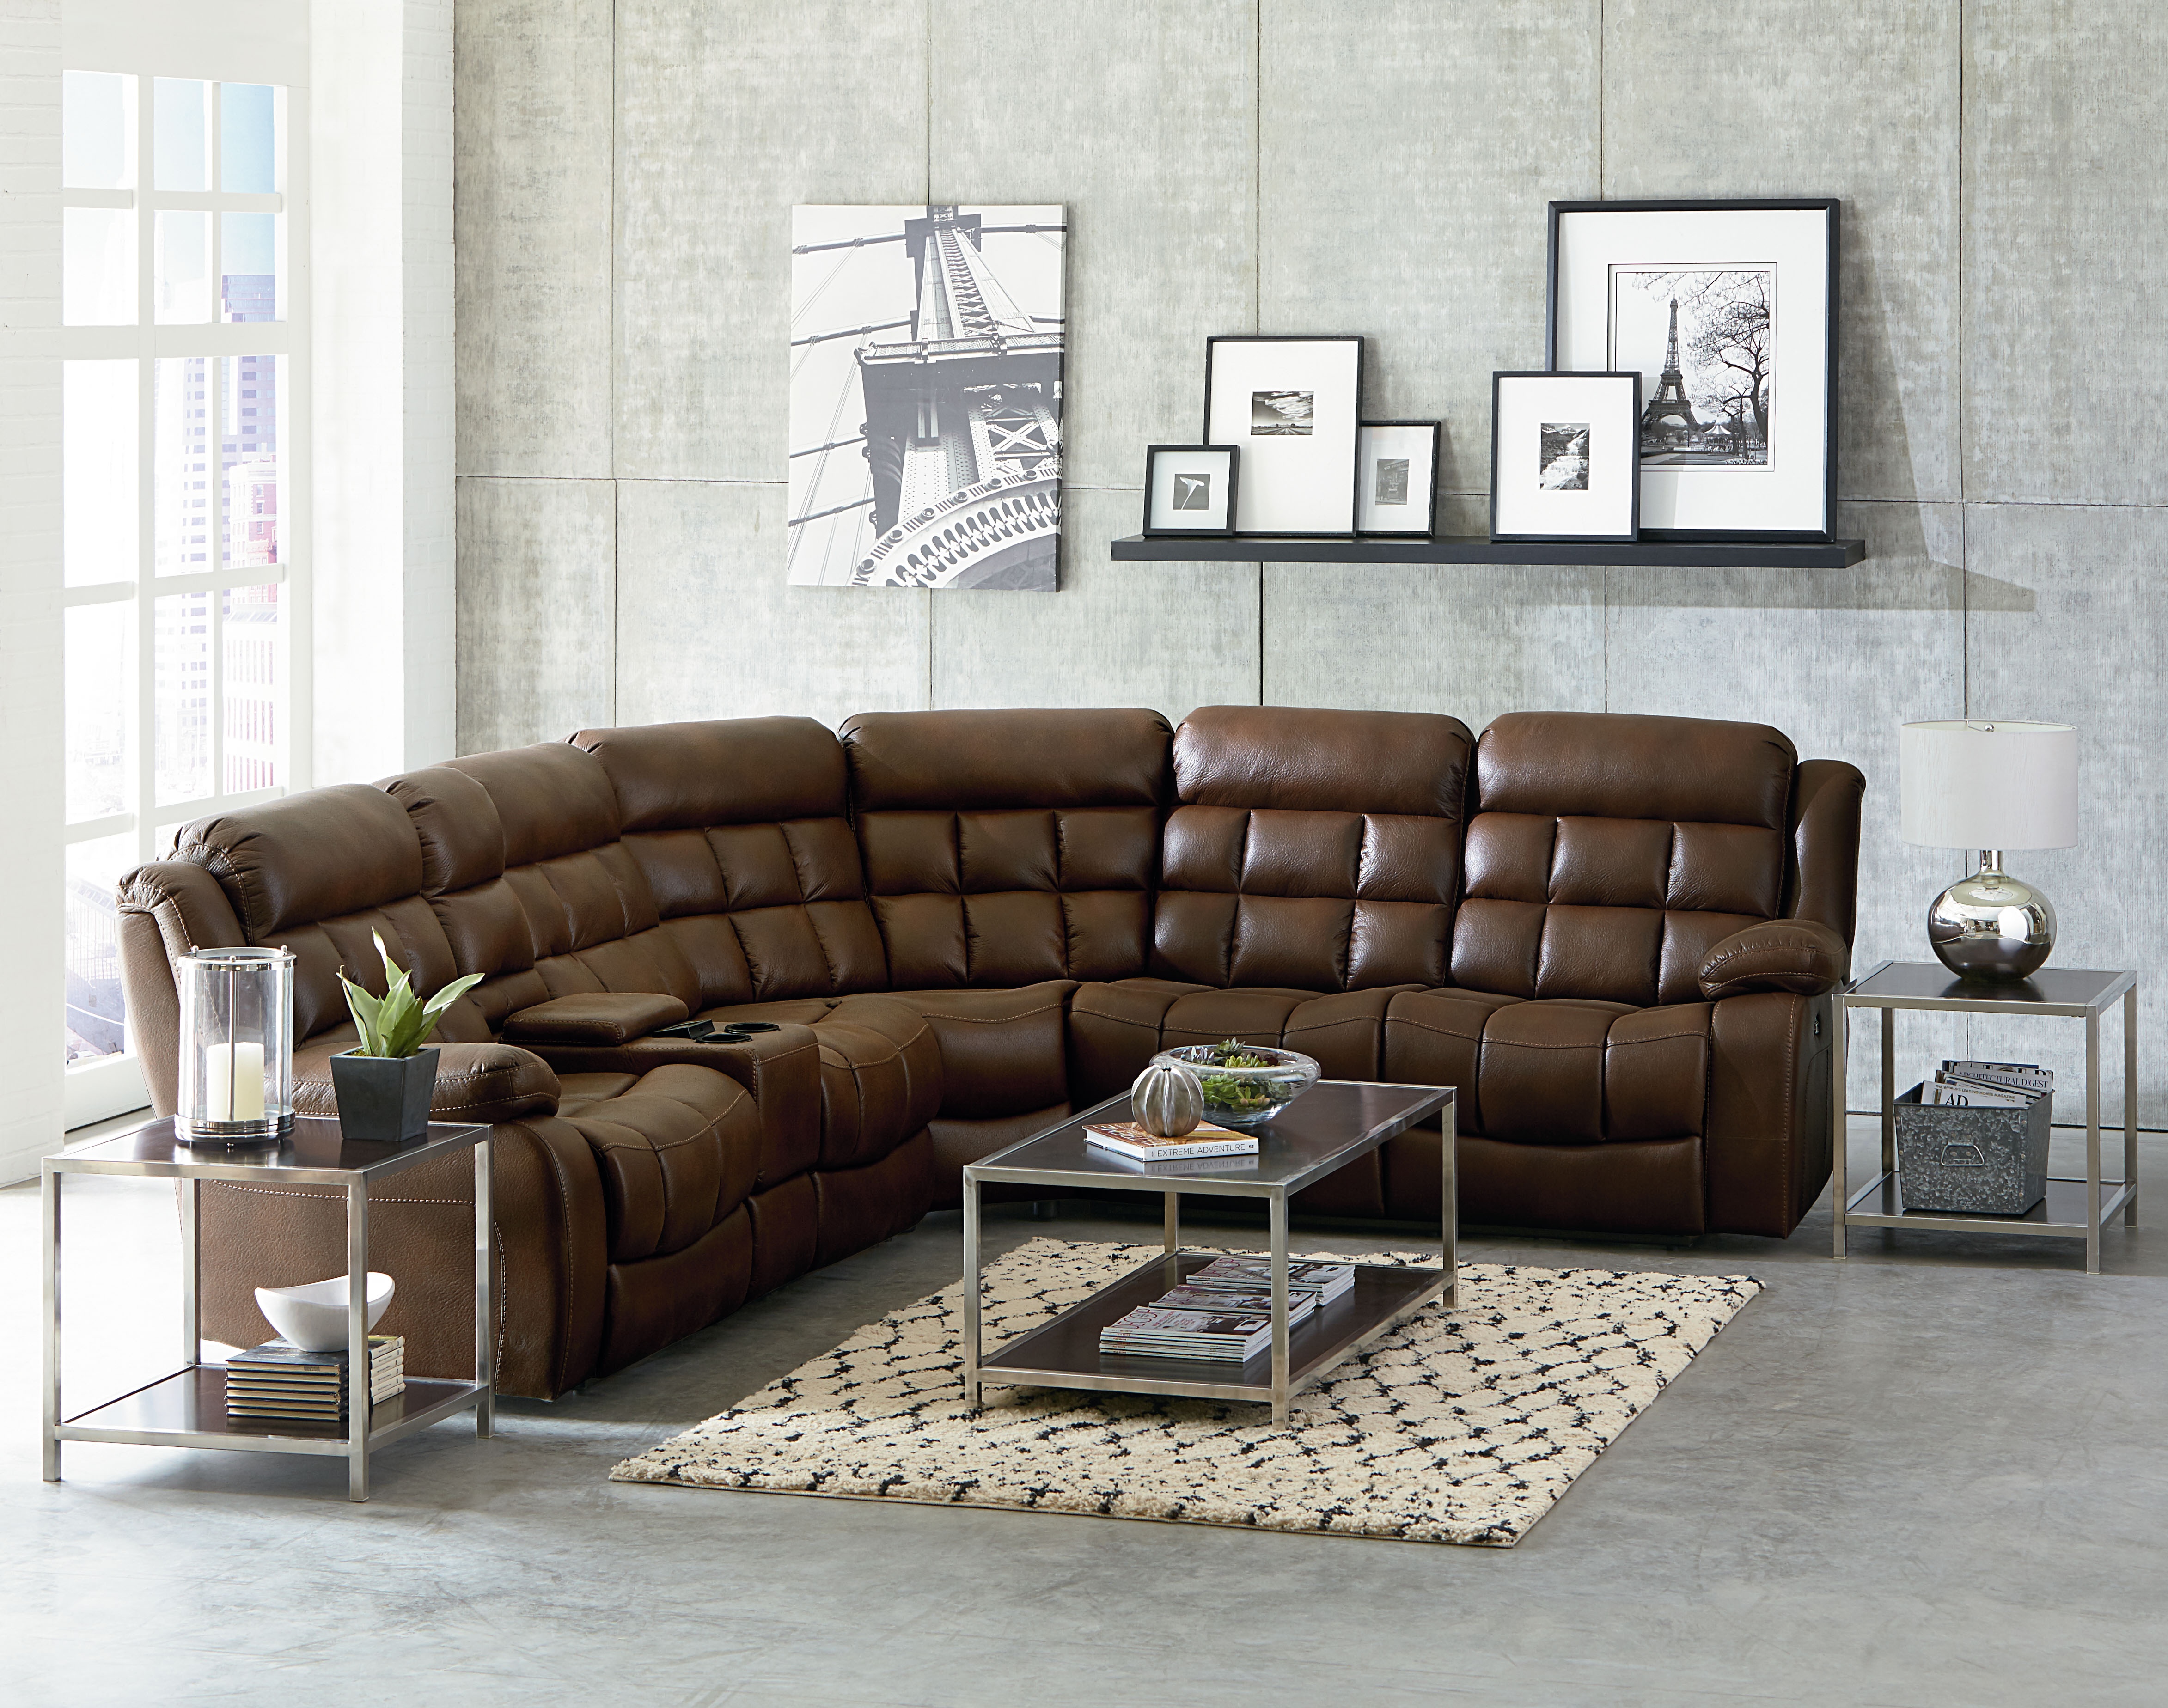 Destination Power Reclining Sectional
Includes 3 Power Recliners